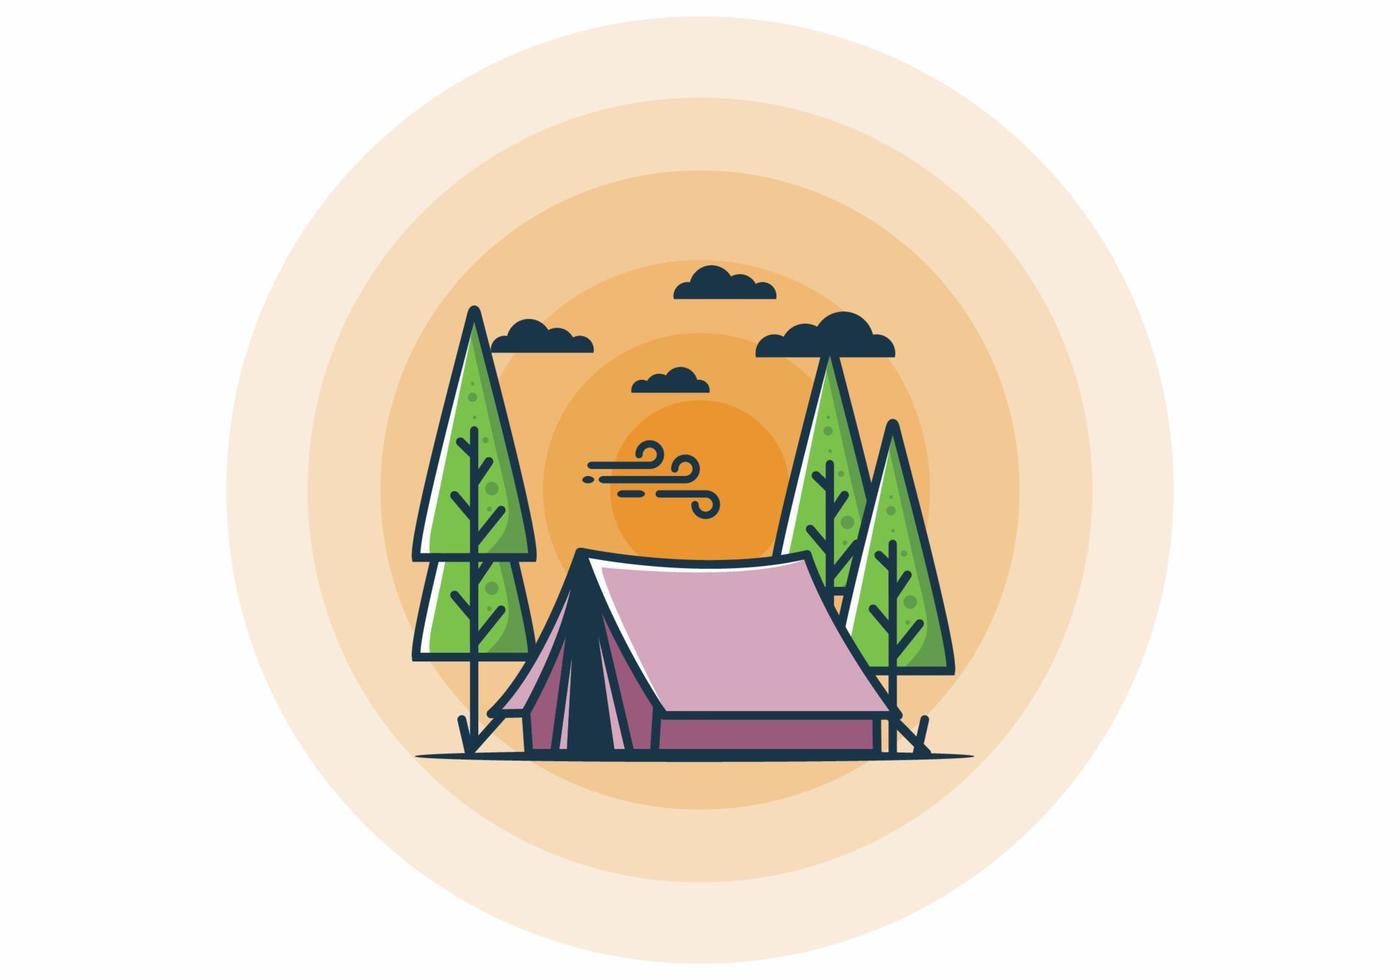 Big camping tent and pine trees illustration vector